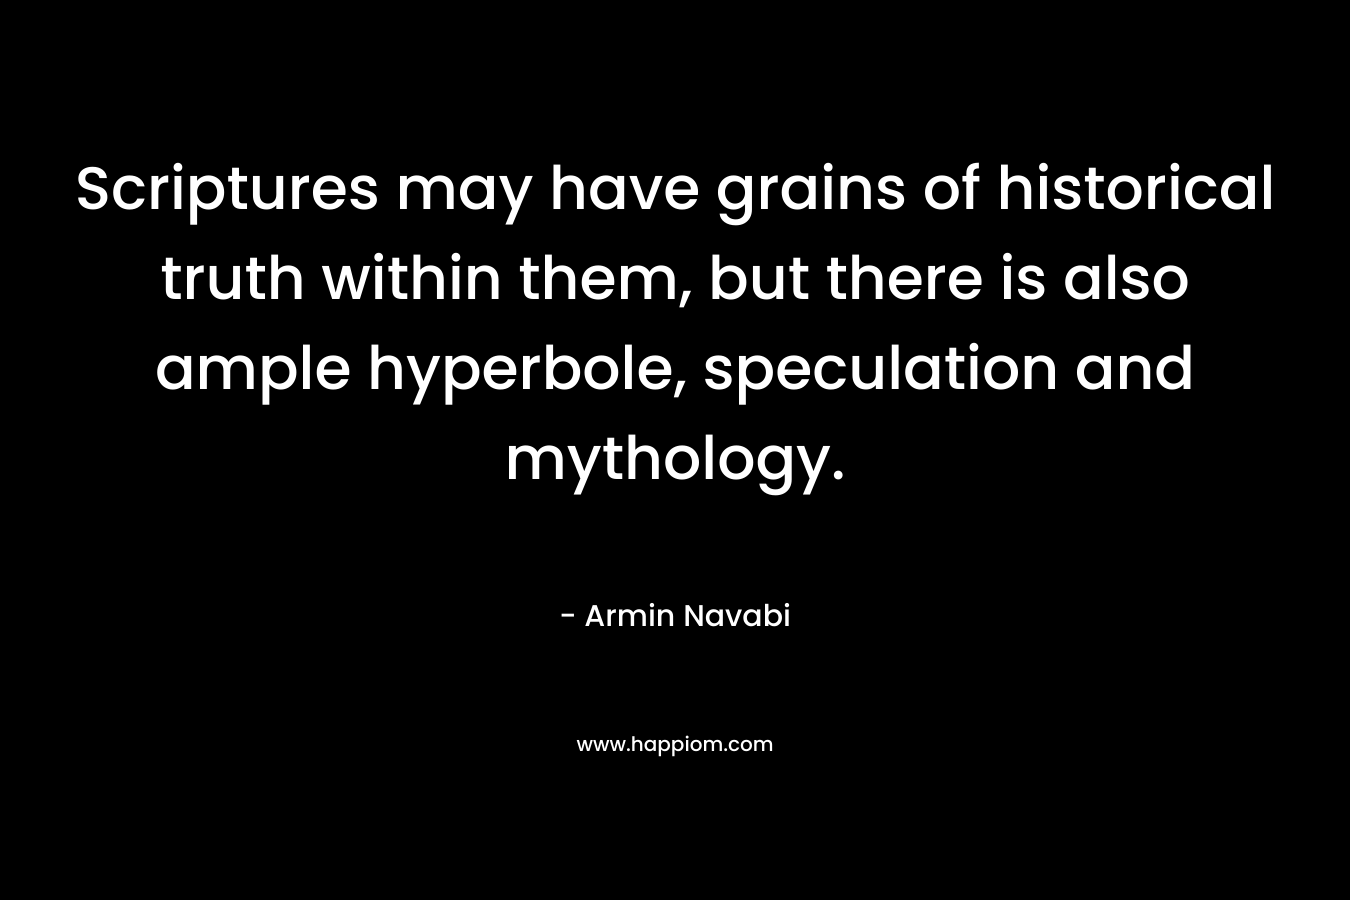 Scriptures may have grains of historical truth within them, but there is also ample hyperbole, speculation and mythology. – Armin Navabi